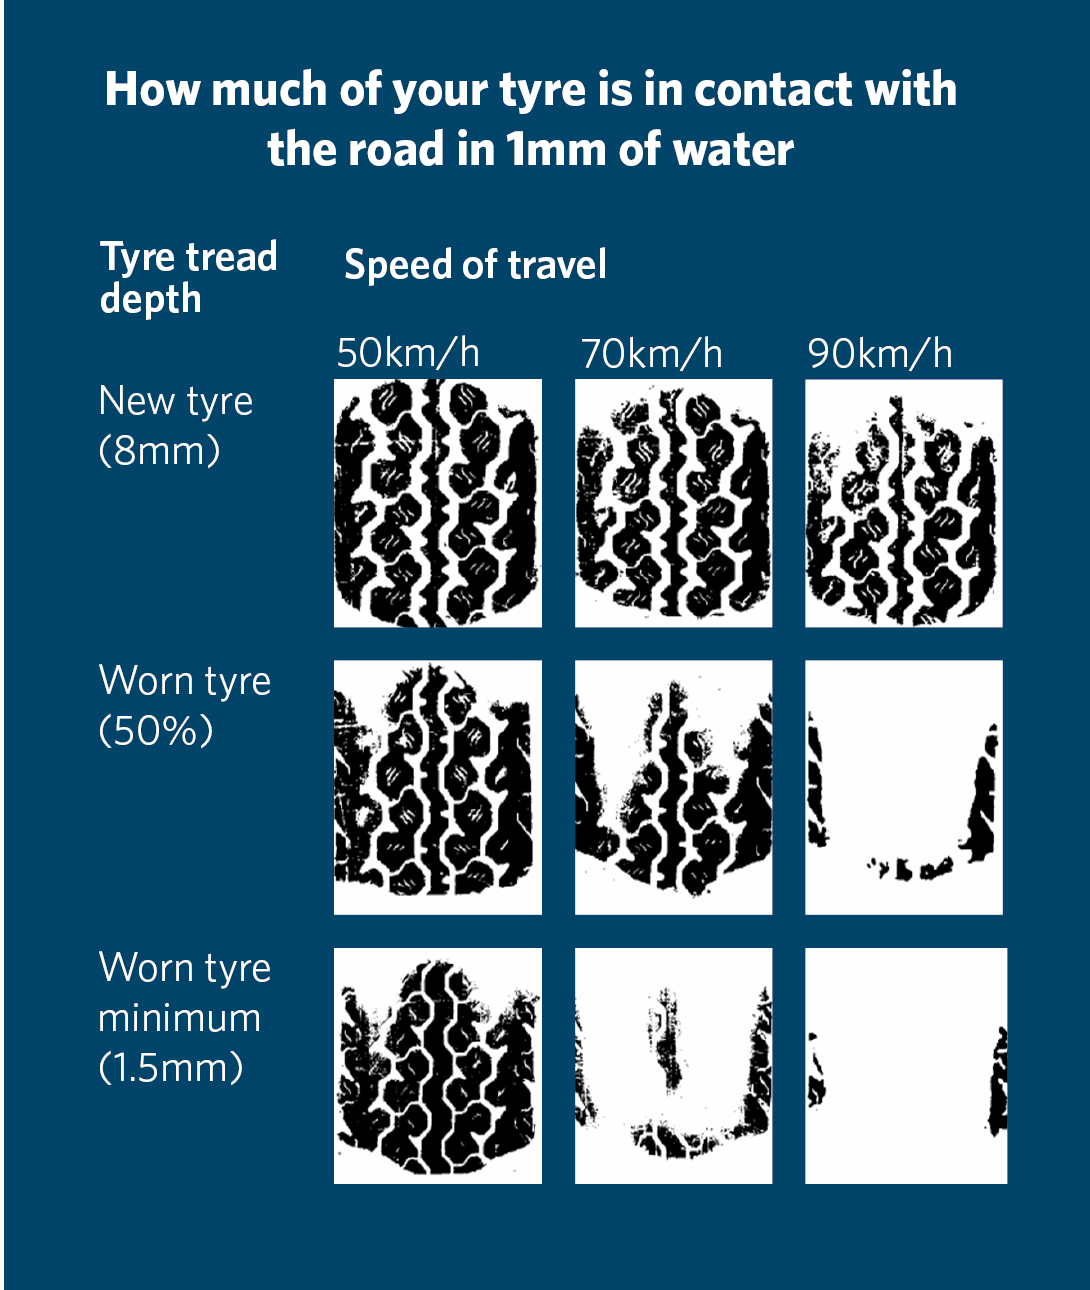 How much of your tyre is in contact with the road in 1mm of water